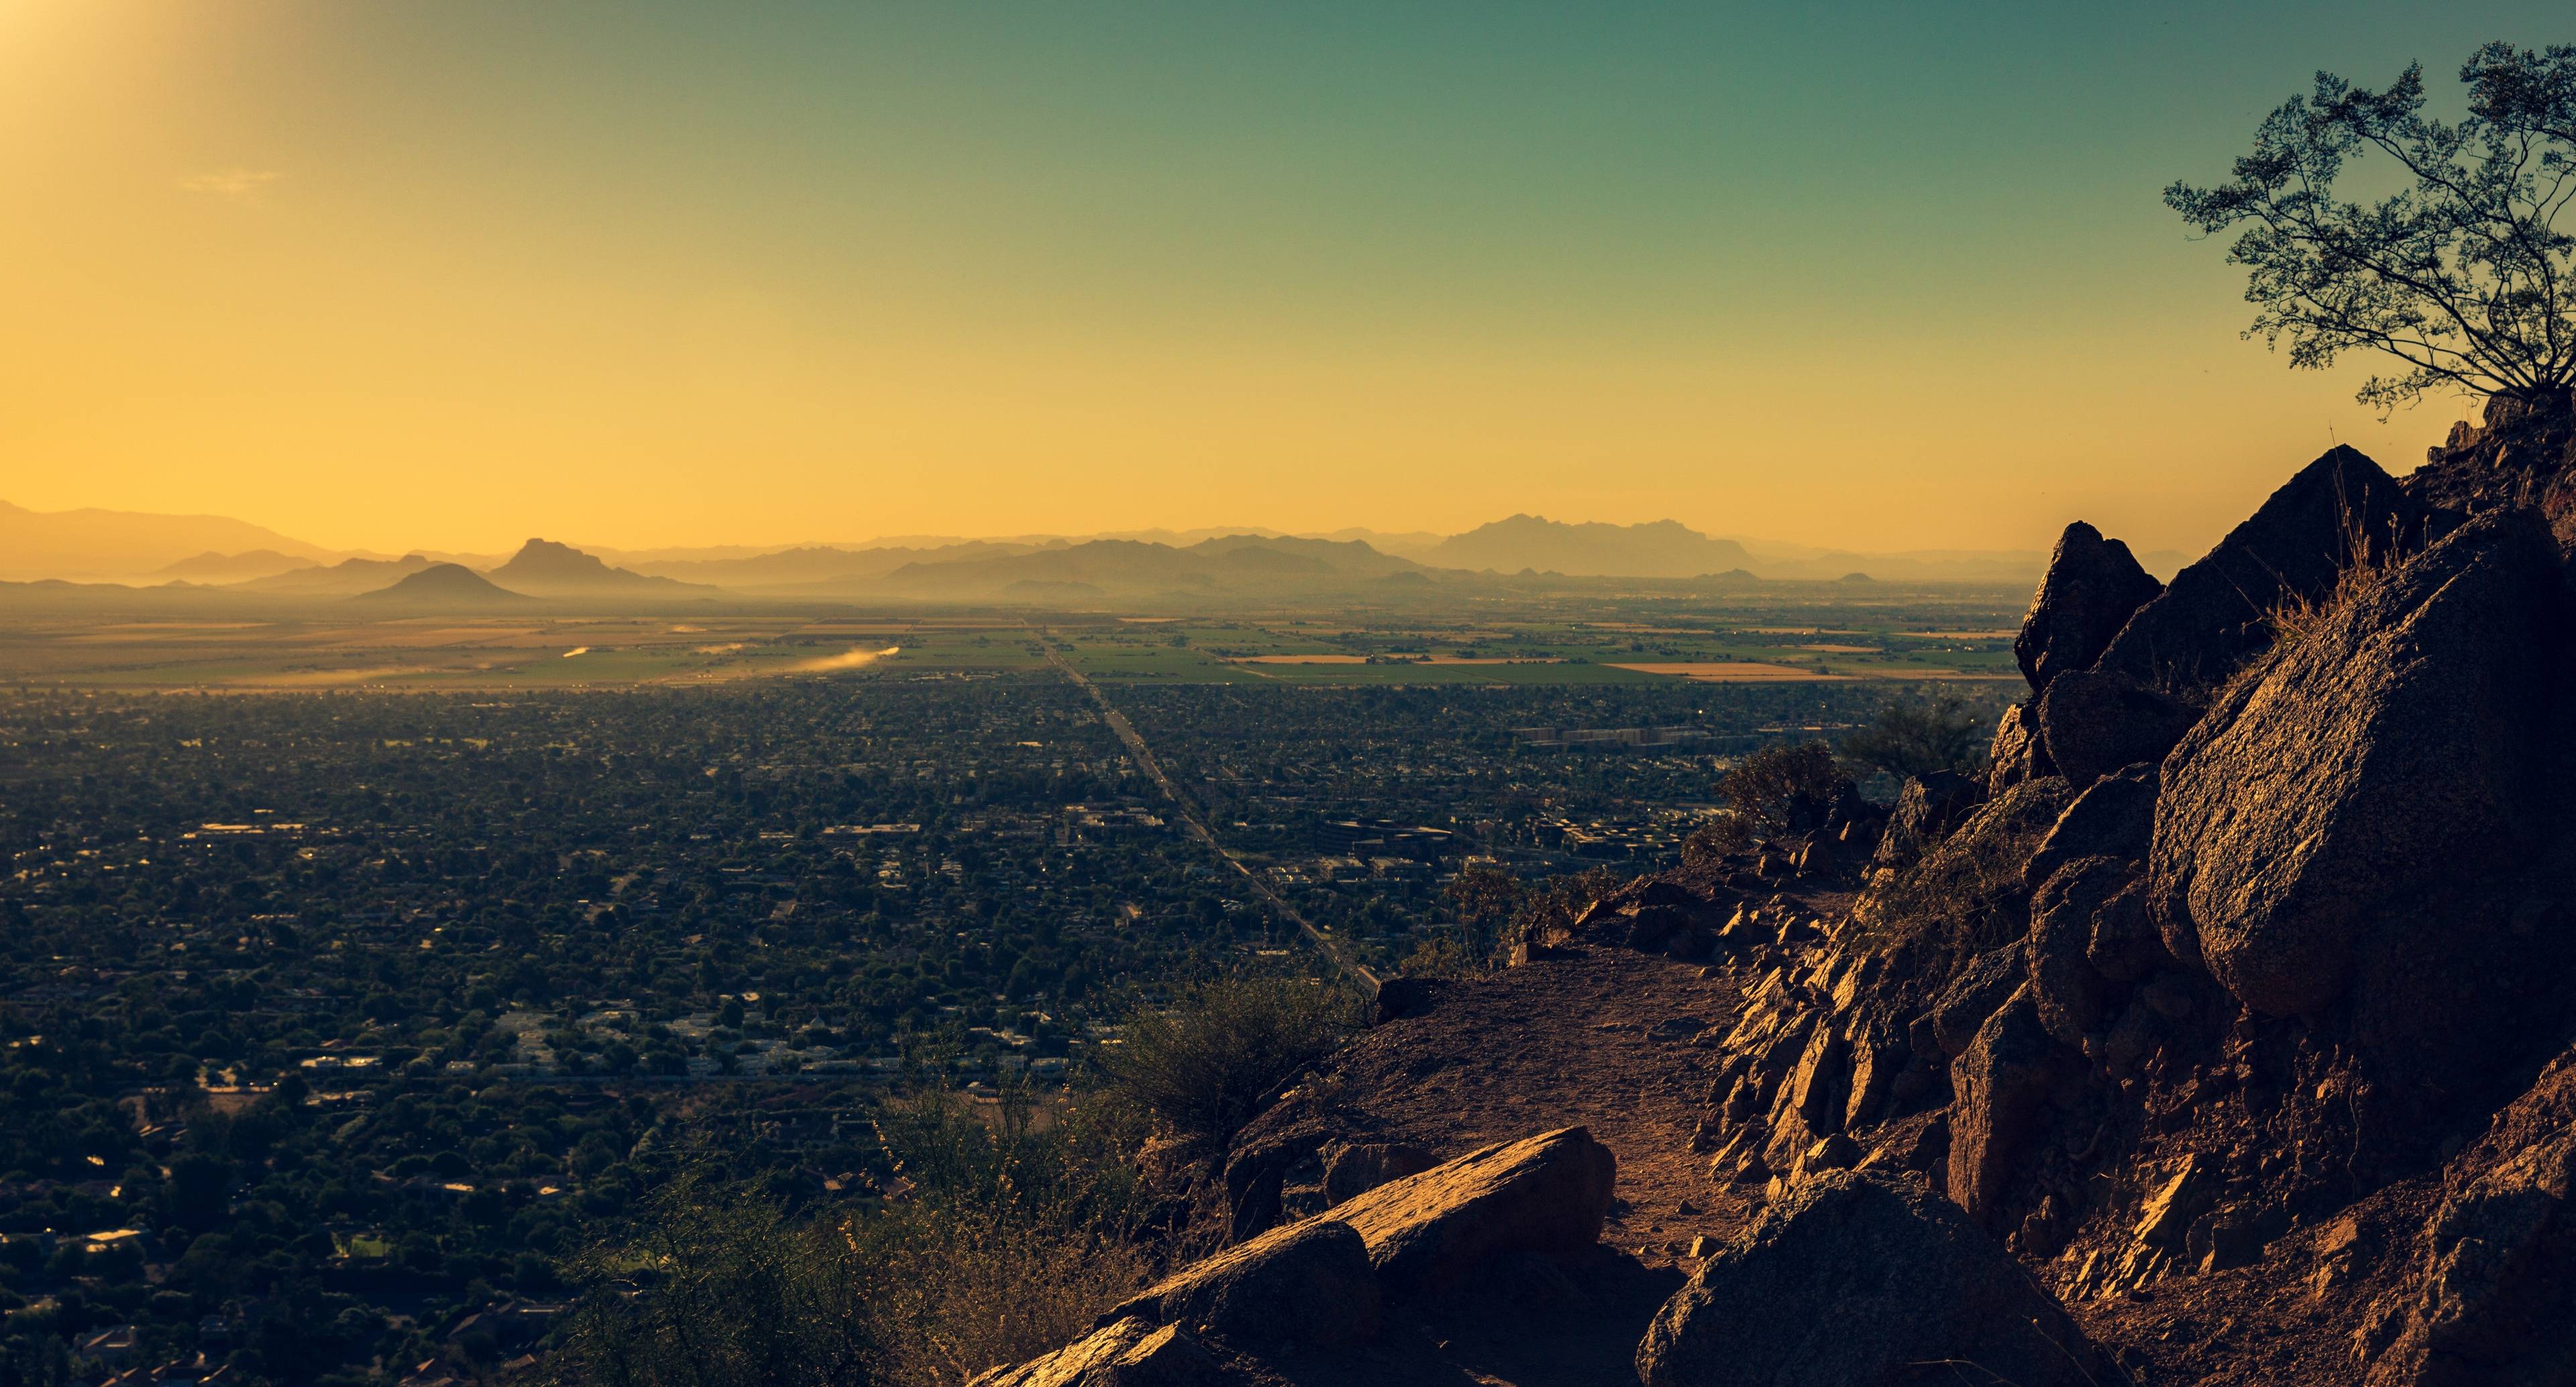 Welcome to the Valley of the Sun, Phoenix